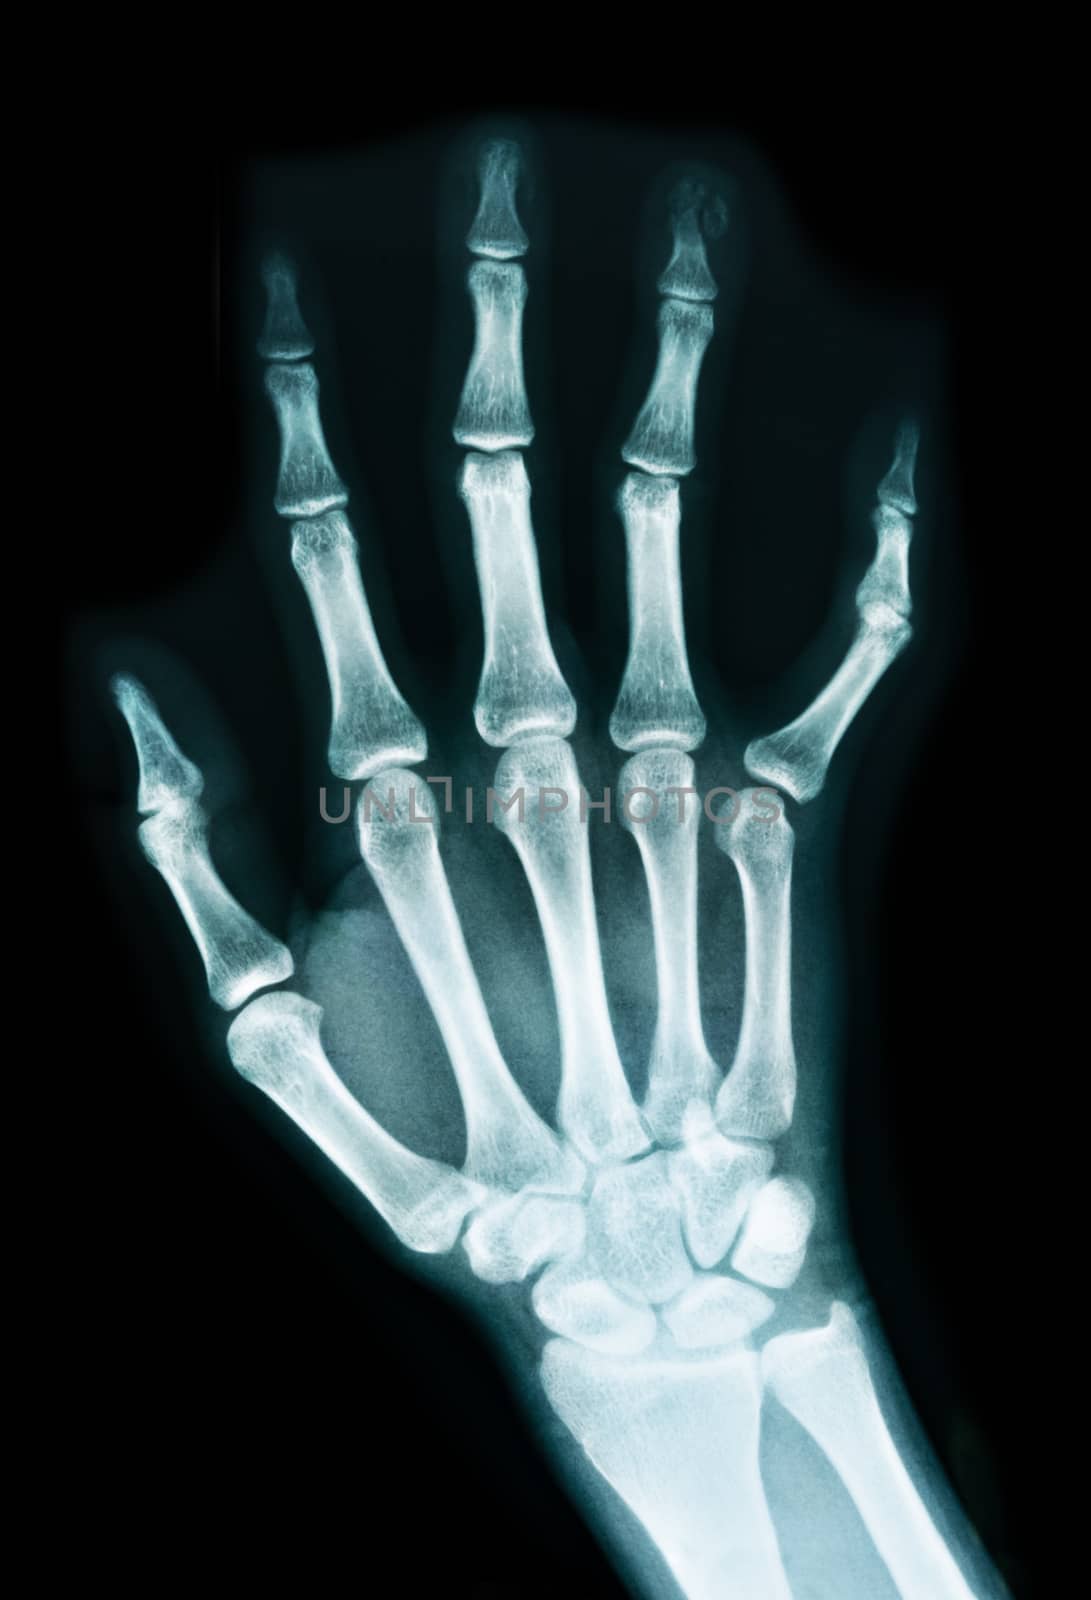 X-ray of a human hand